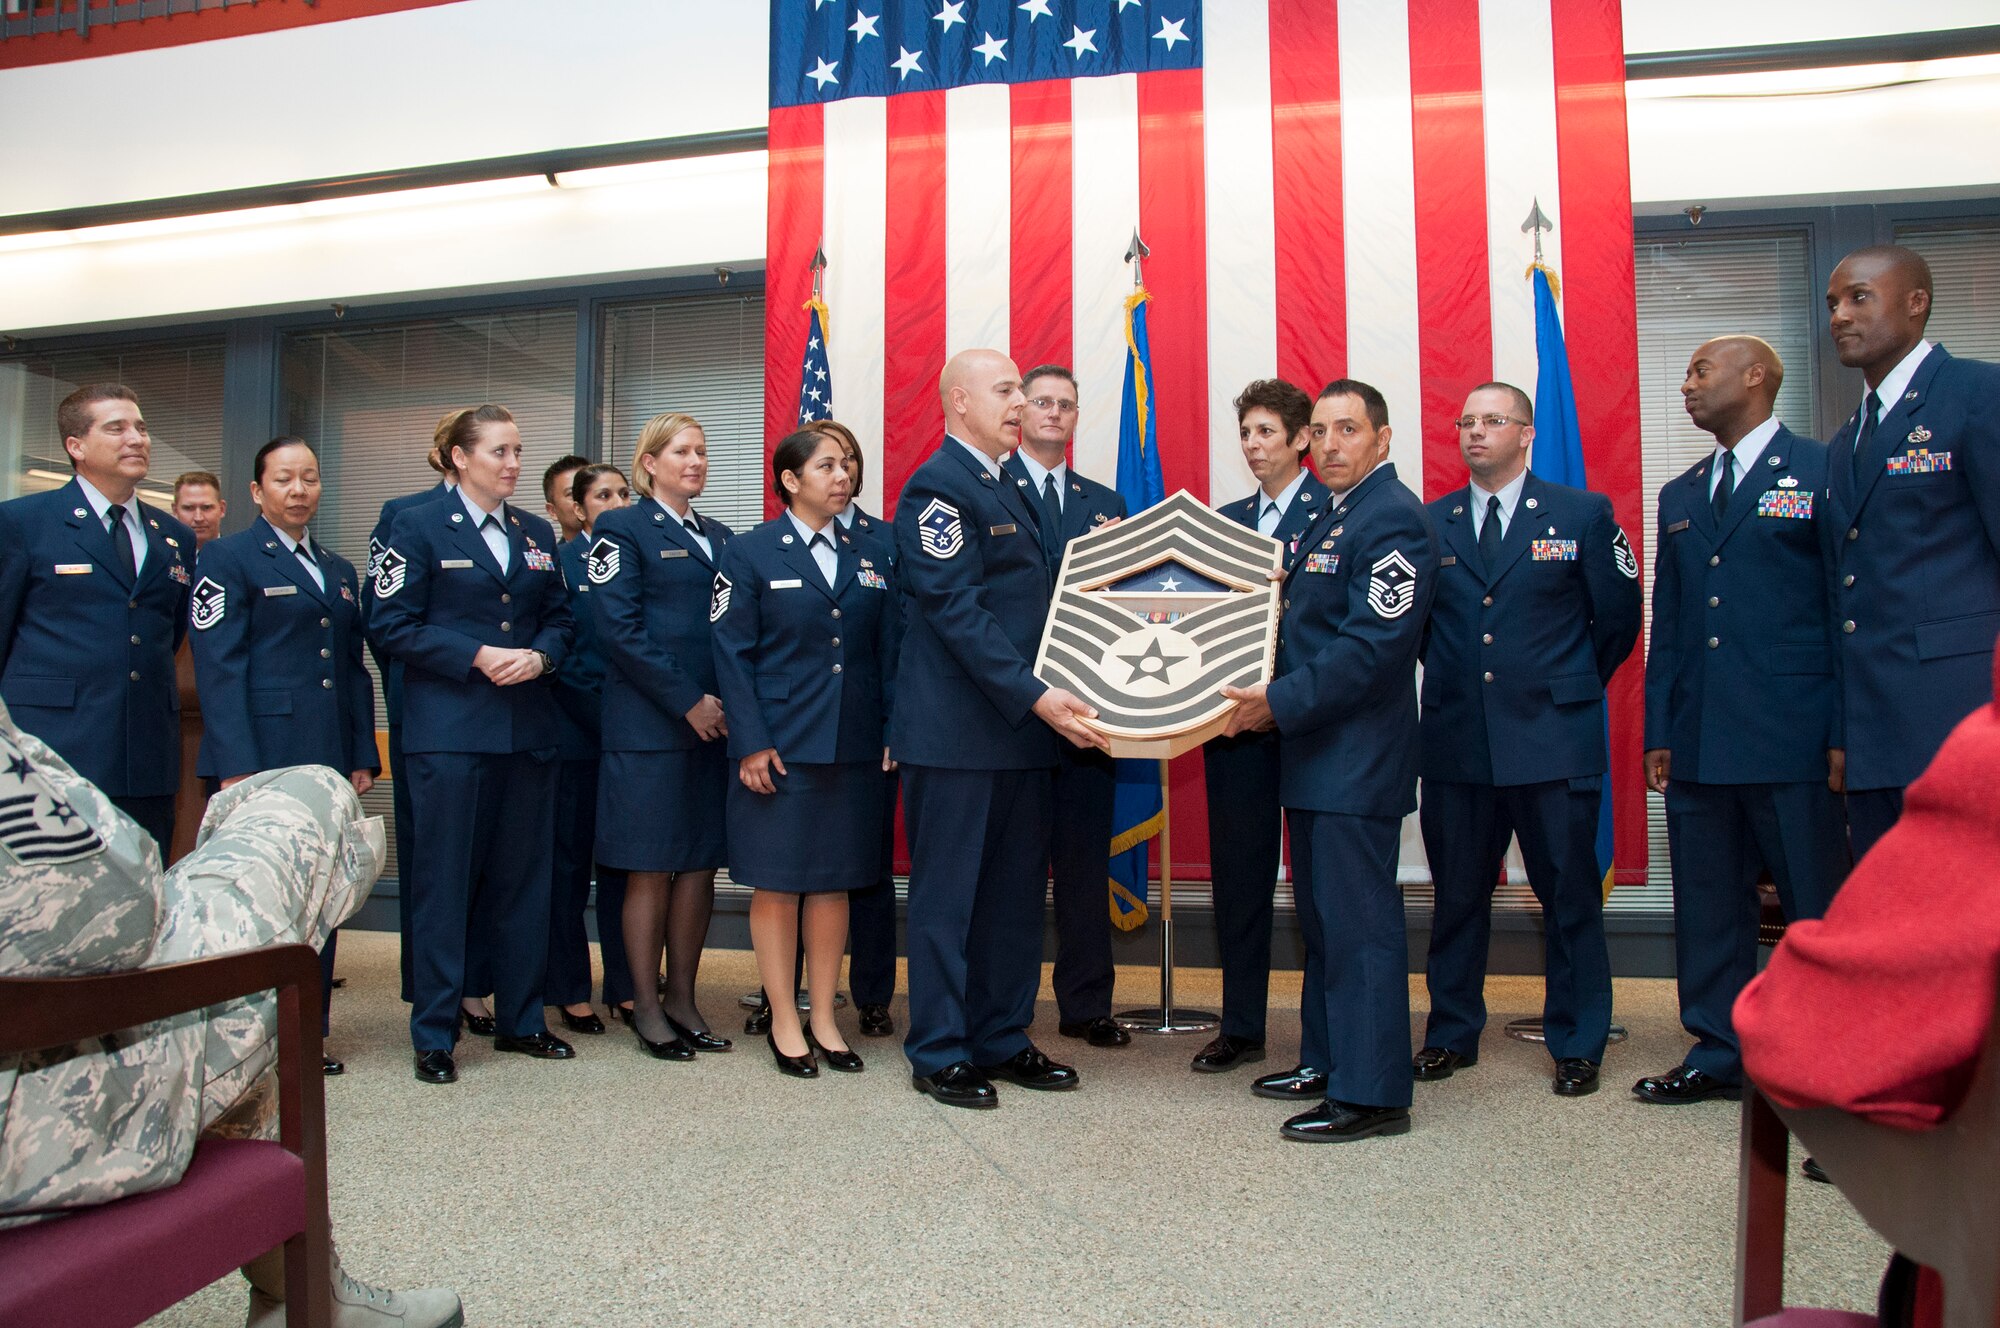 TRAVIS AIR FORCE BASE, Calif. -- Chief Master Sgt. Sandra "Sunny" Santos, 349th Air Mobility Wing, retired after nearly 33 years of service at a ceremony March 9, at Travis Air Force Base, Calif. (U.S. Air Force photos / Master Sgt. Rachel Martinez)

